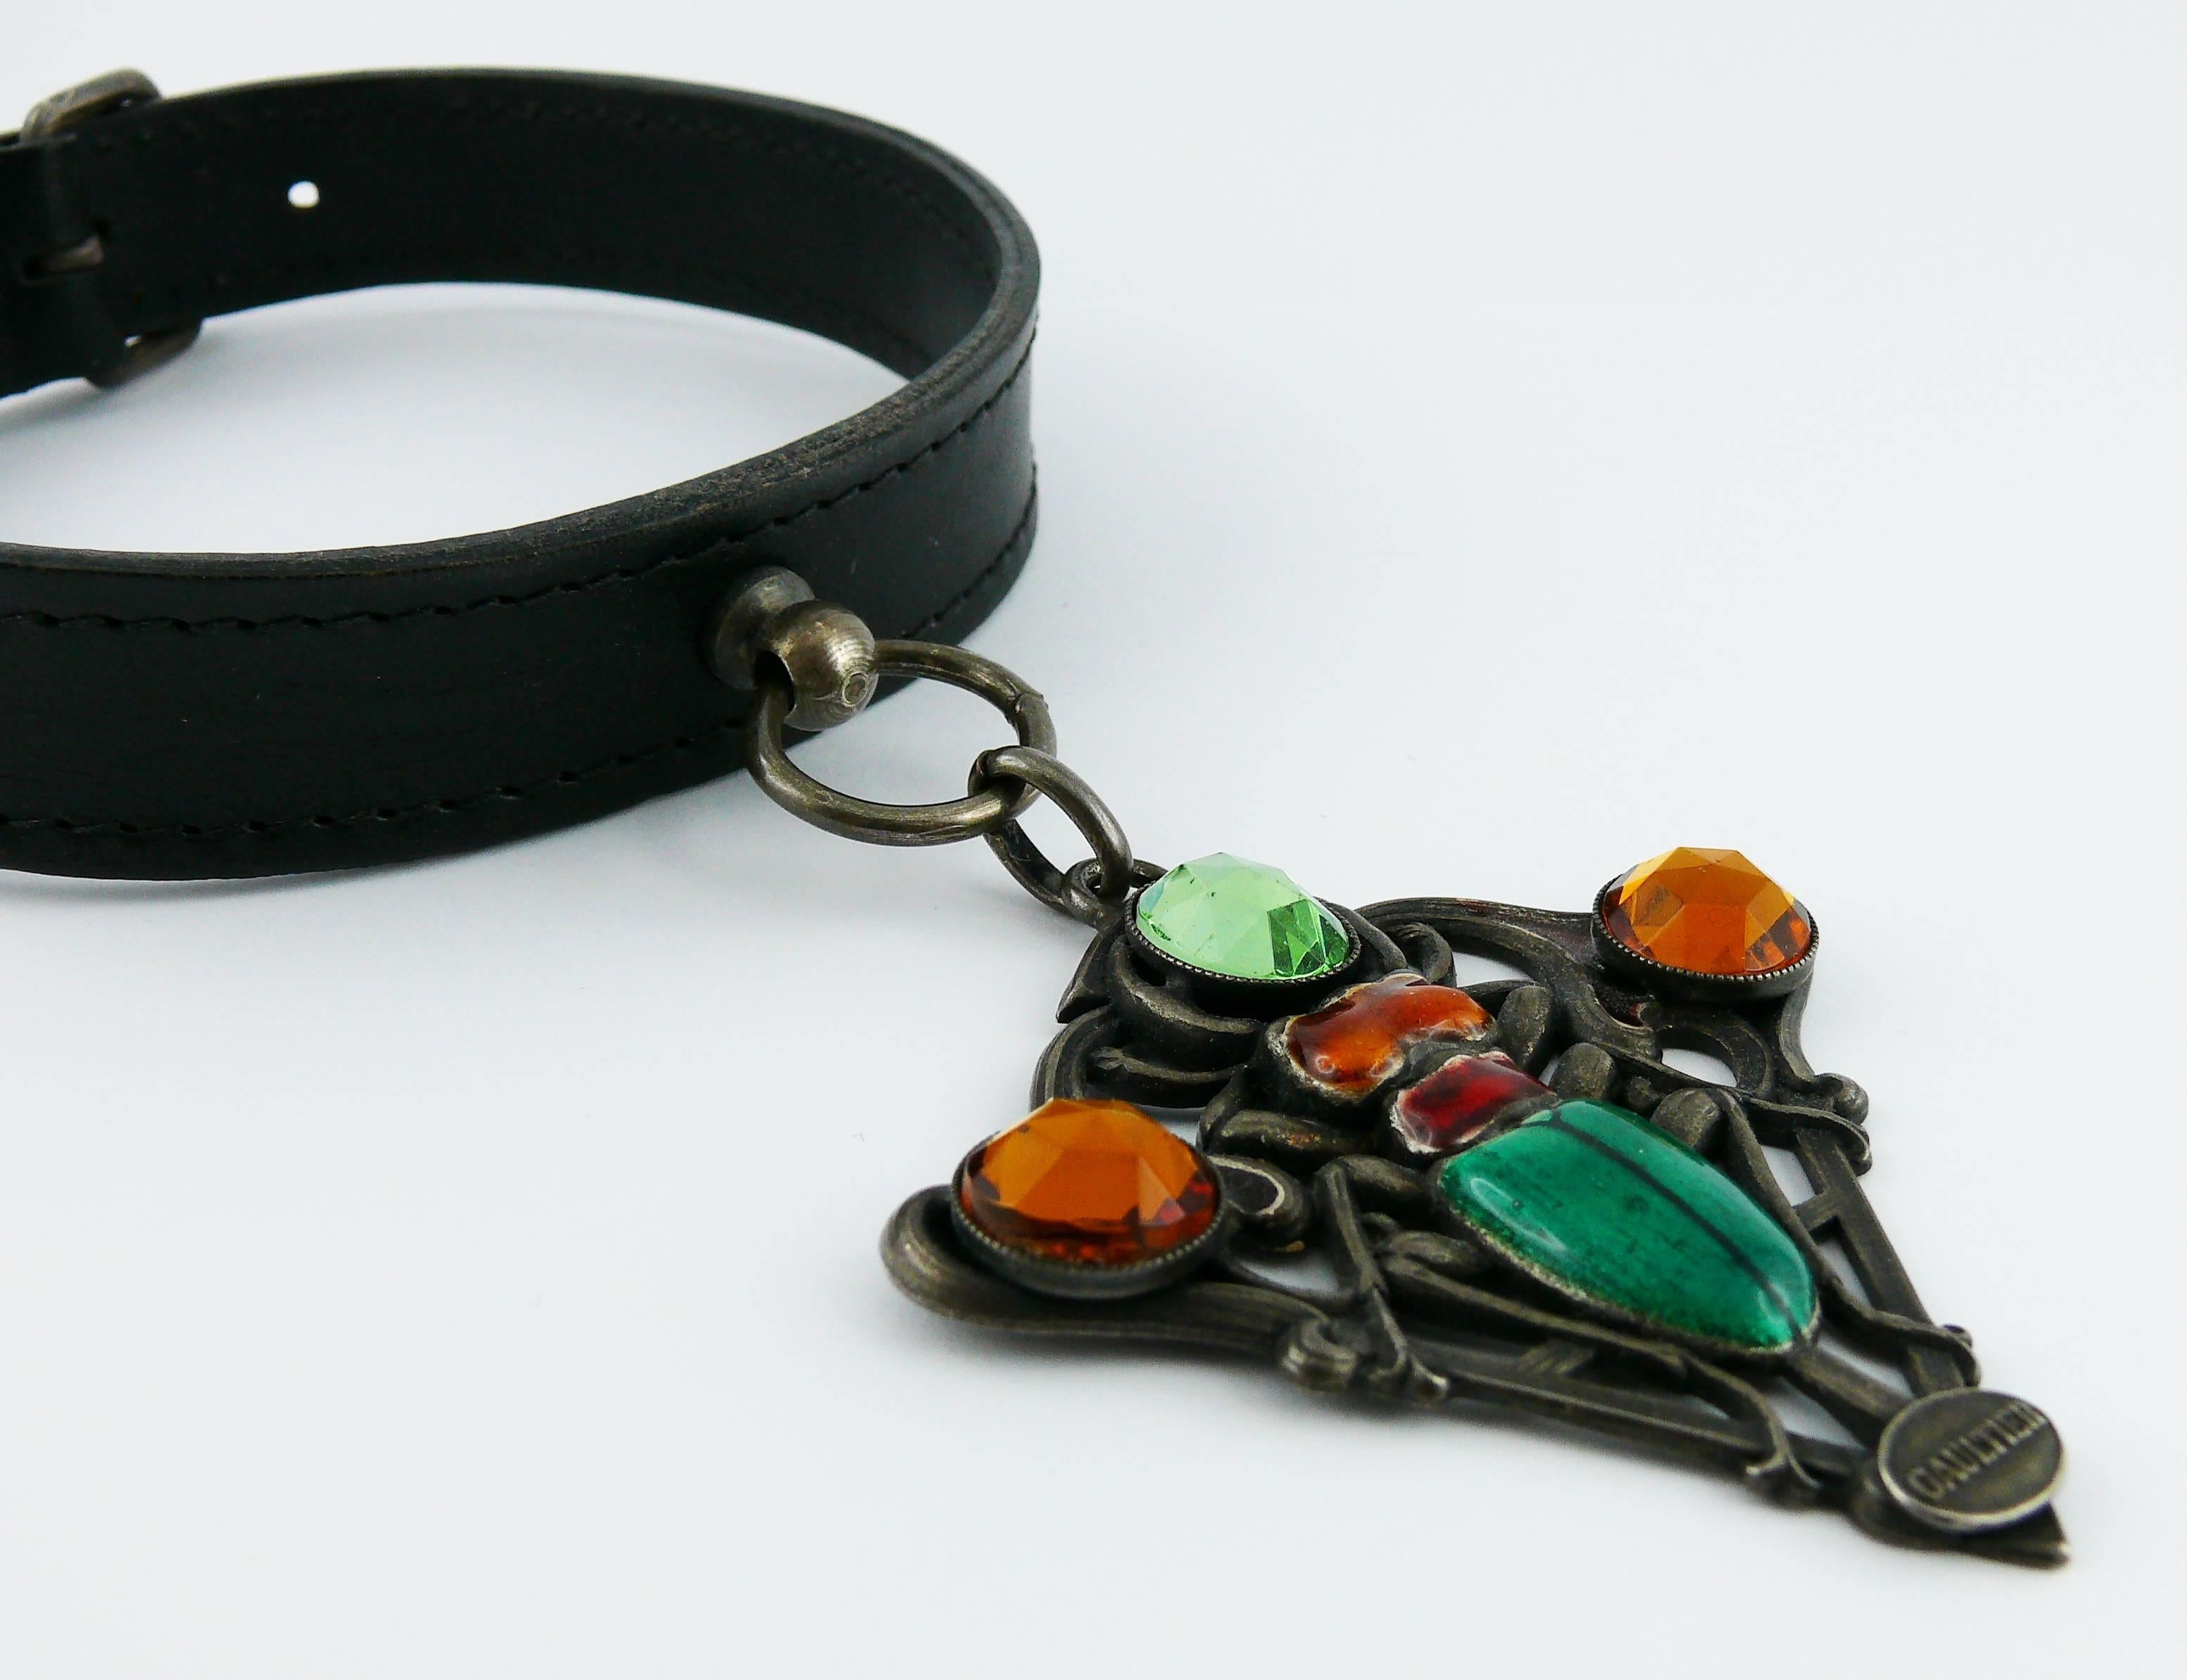 JEAN PAUL GAULTIER vintage 1990s black leather dog collar necklace featuring a large enameled scarab pendant with multicolored crystal embellishement.

Marked GAULTIER.

Indicative measurements : max. circumference approx. 35.19 cm (13.85 inches) /